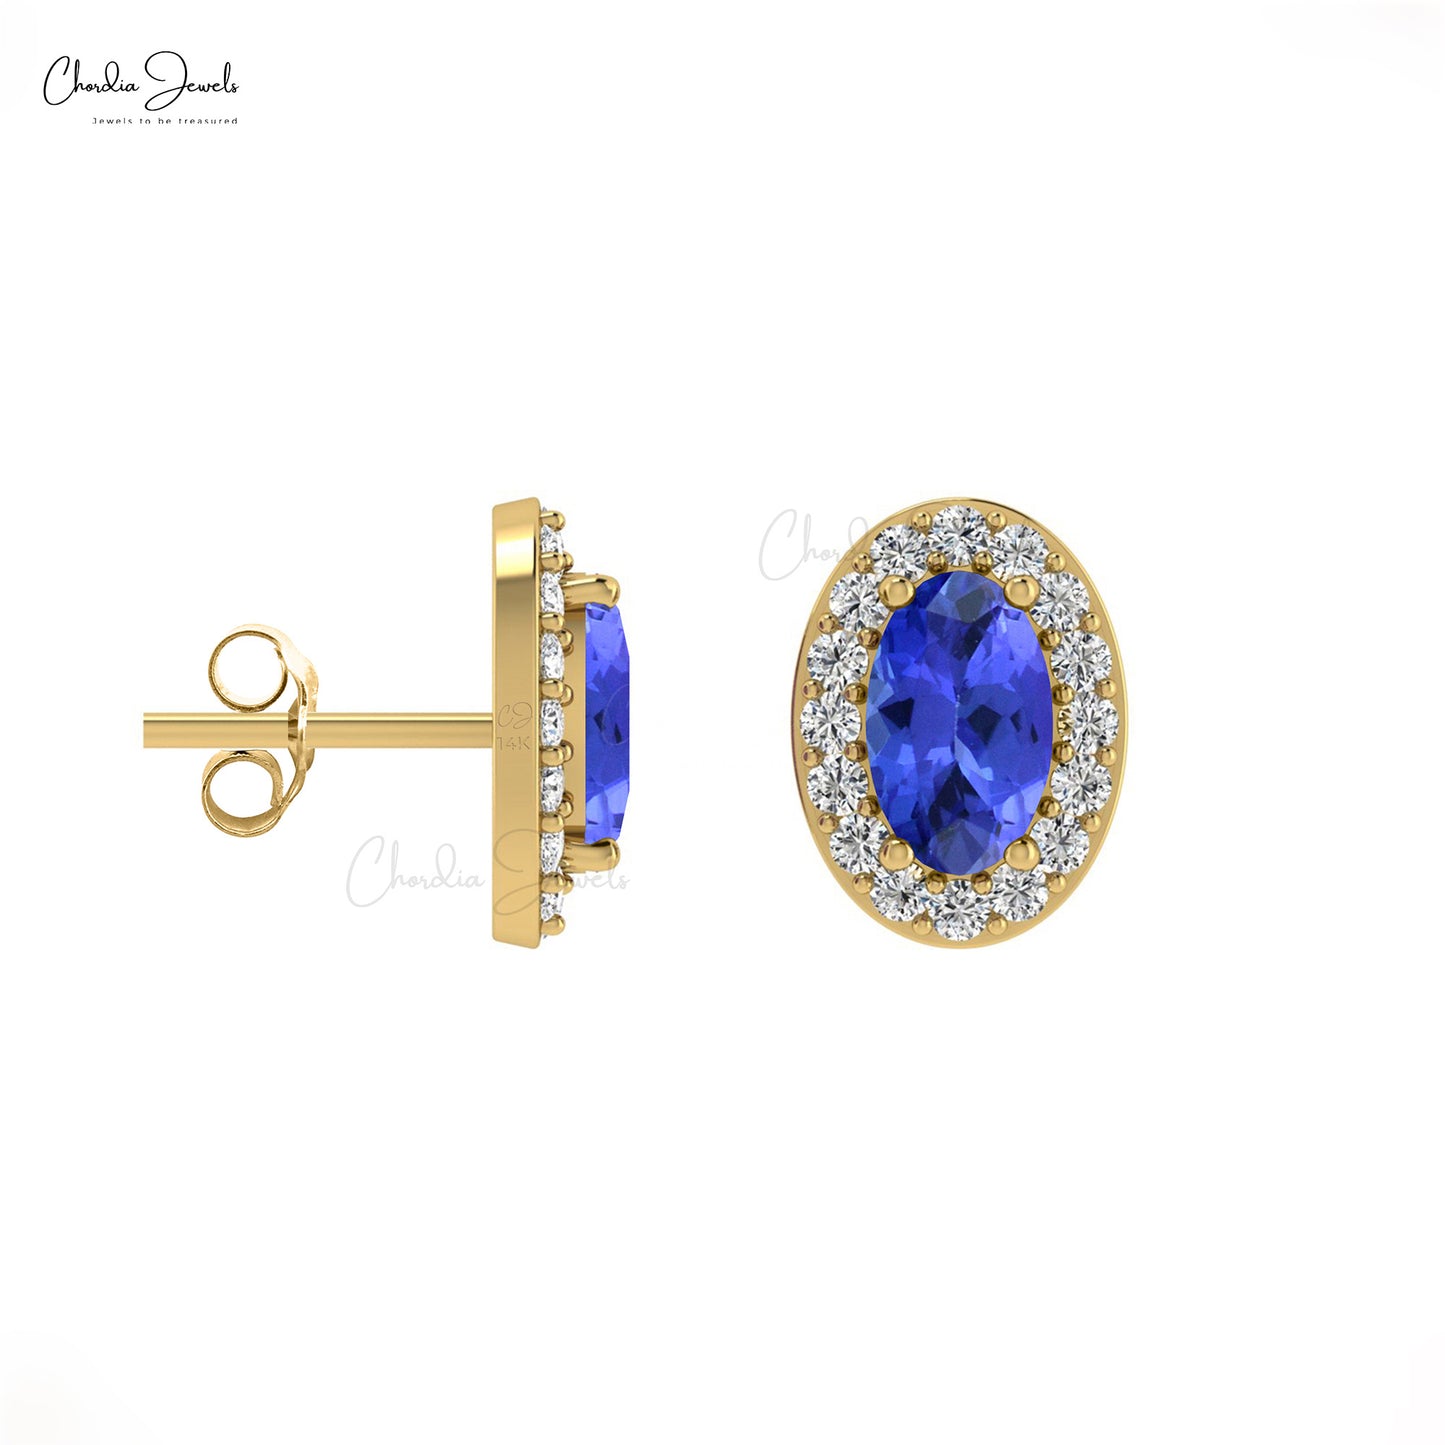 Load image into Gallery viewer, Real Blue Tanzanite Halo Studs 14k Real Gold G-H Diamond Push Back Earrings 5x3mm Oval Cut Light Weight Genuine Jewelry For December Birthstone
